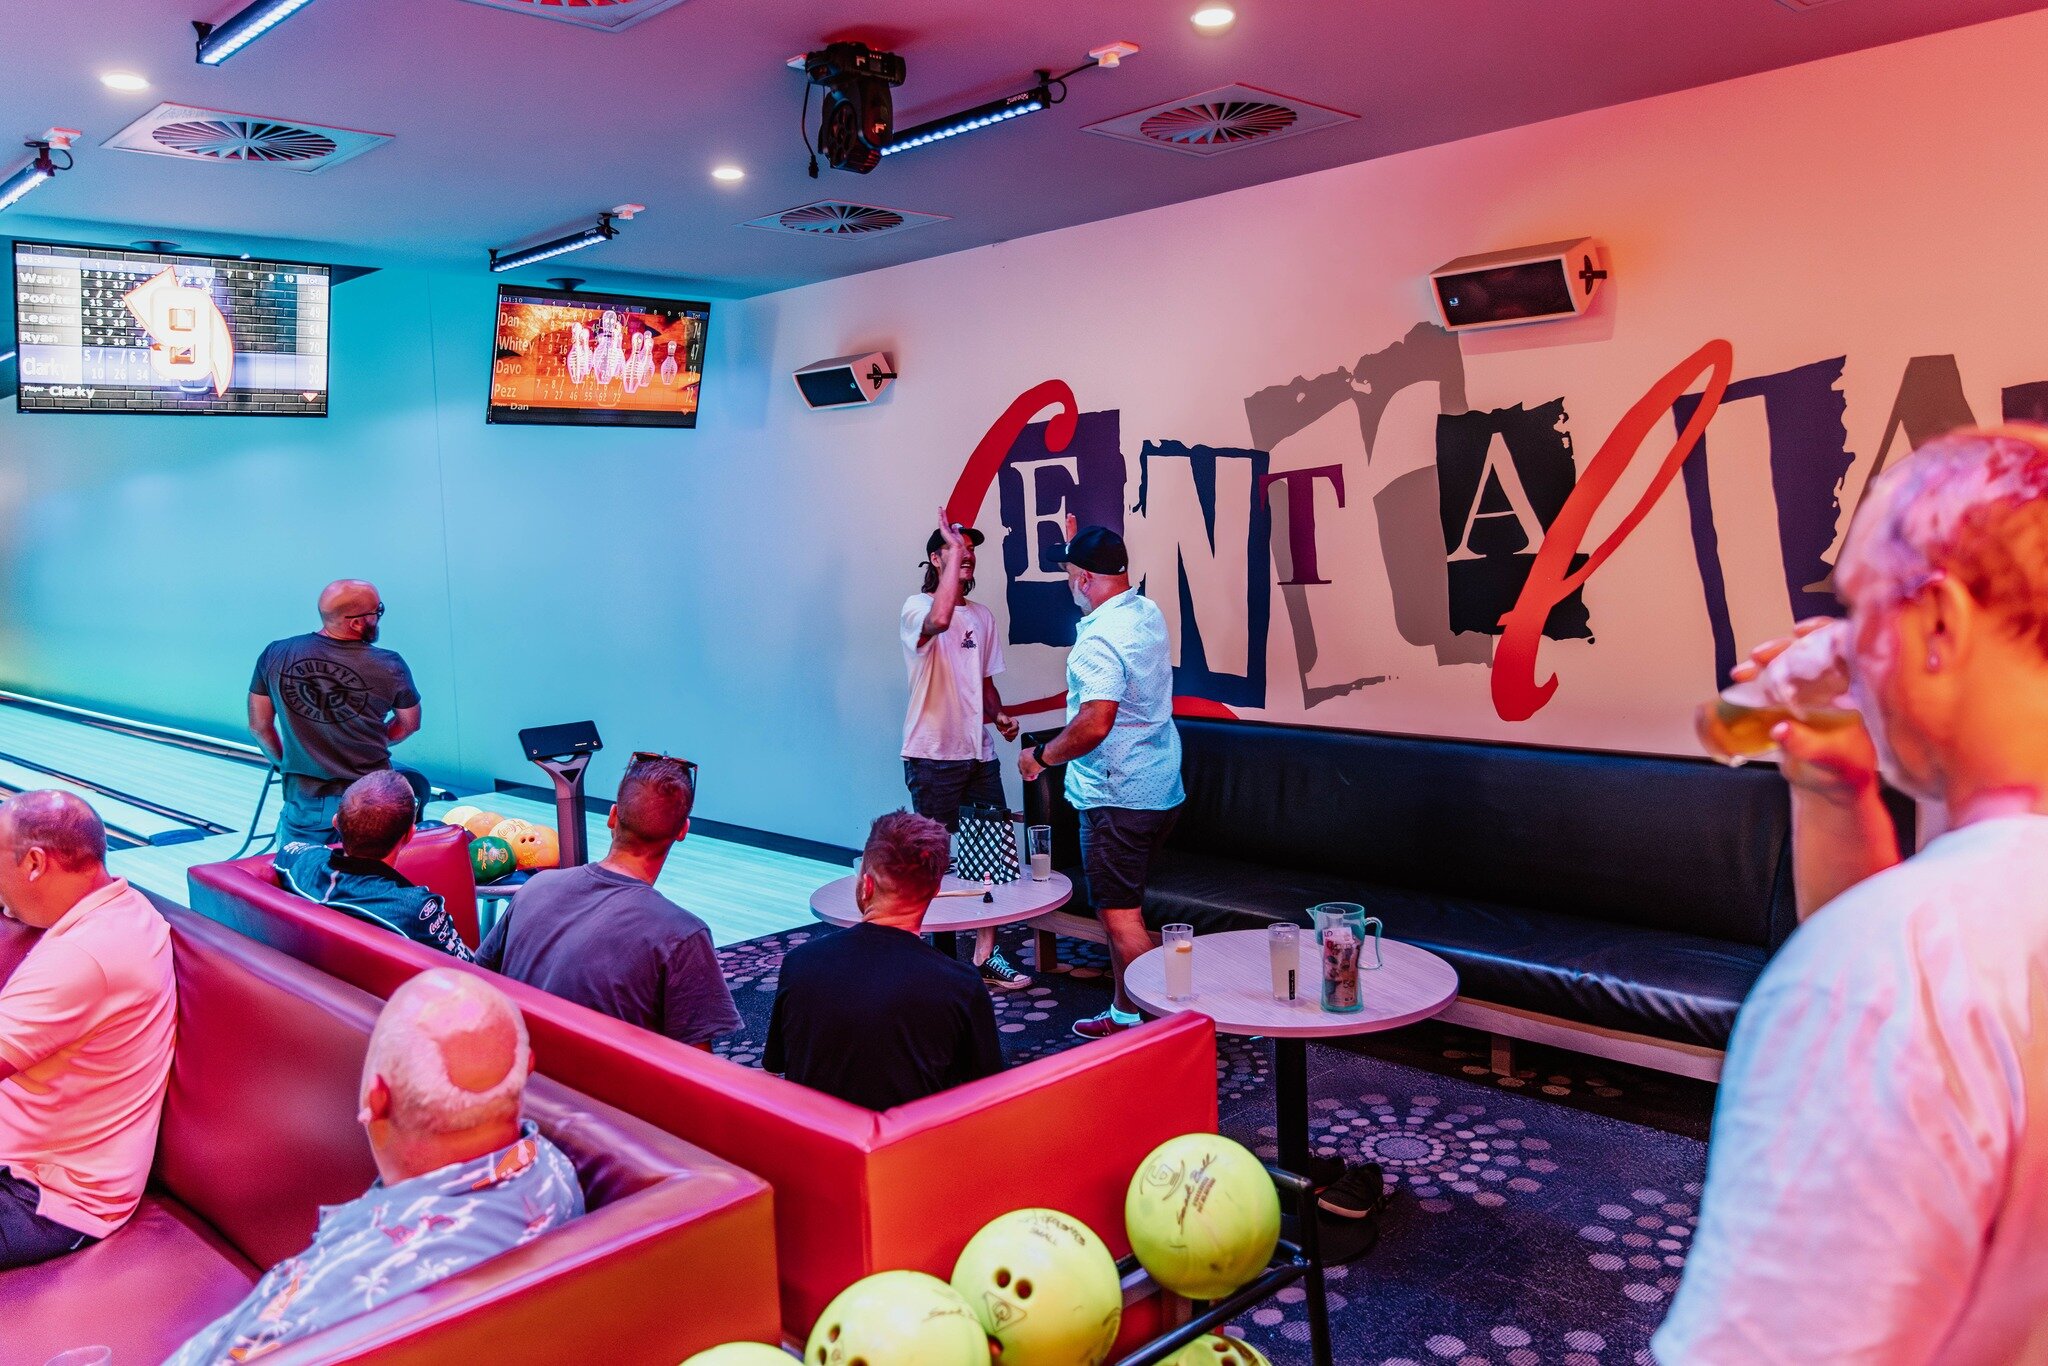 Get ready to spice up your weekend with bowling at Central Lane! 🤌🏽

Whether you&rsquo;re on the hunt for some family fun or friendly competition (in aircon) with your mates, our state-of-the-art bowling alley is where you&rsquo;ll want to spend yo